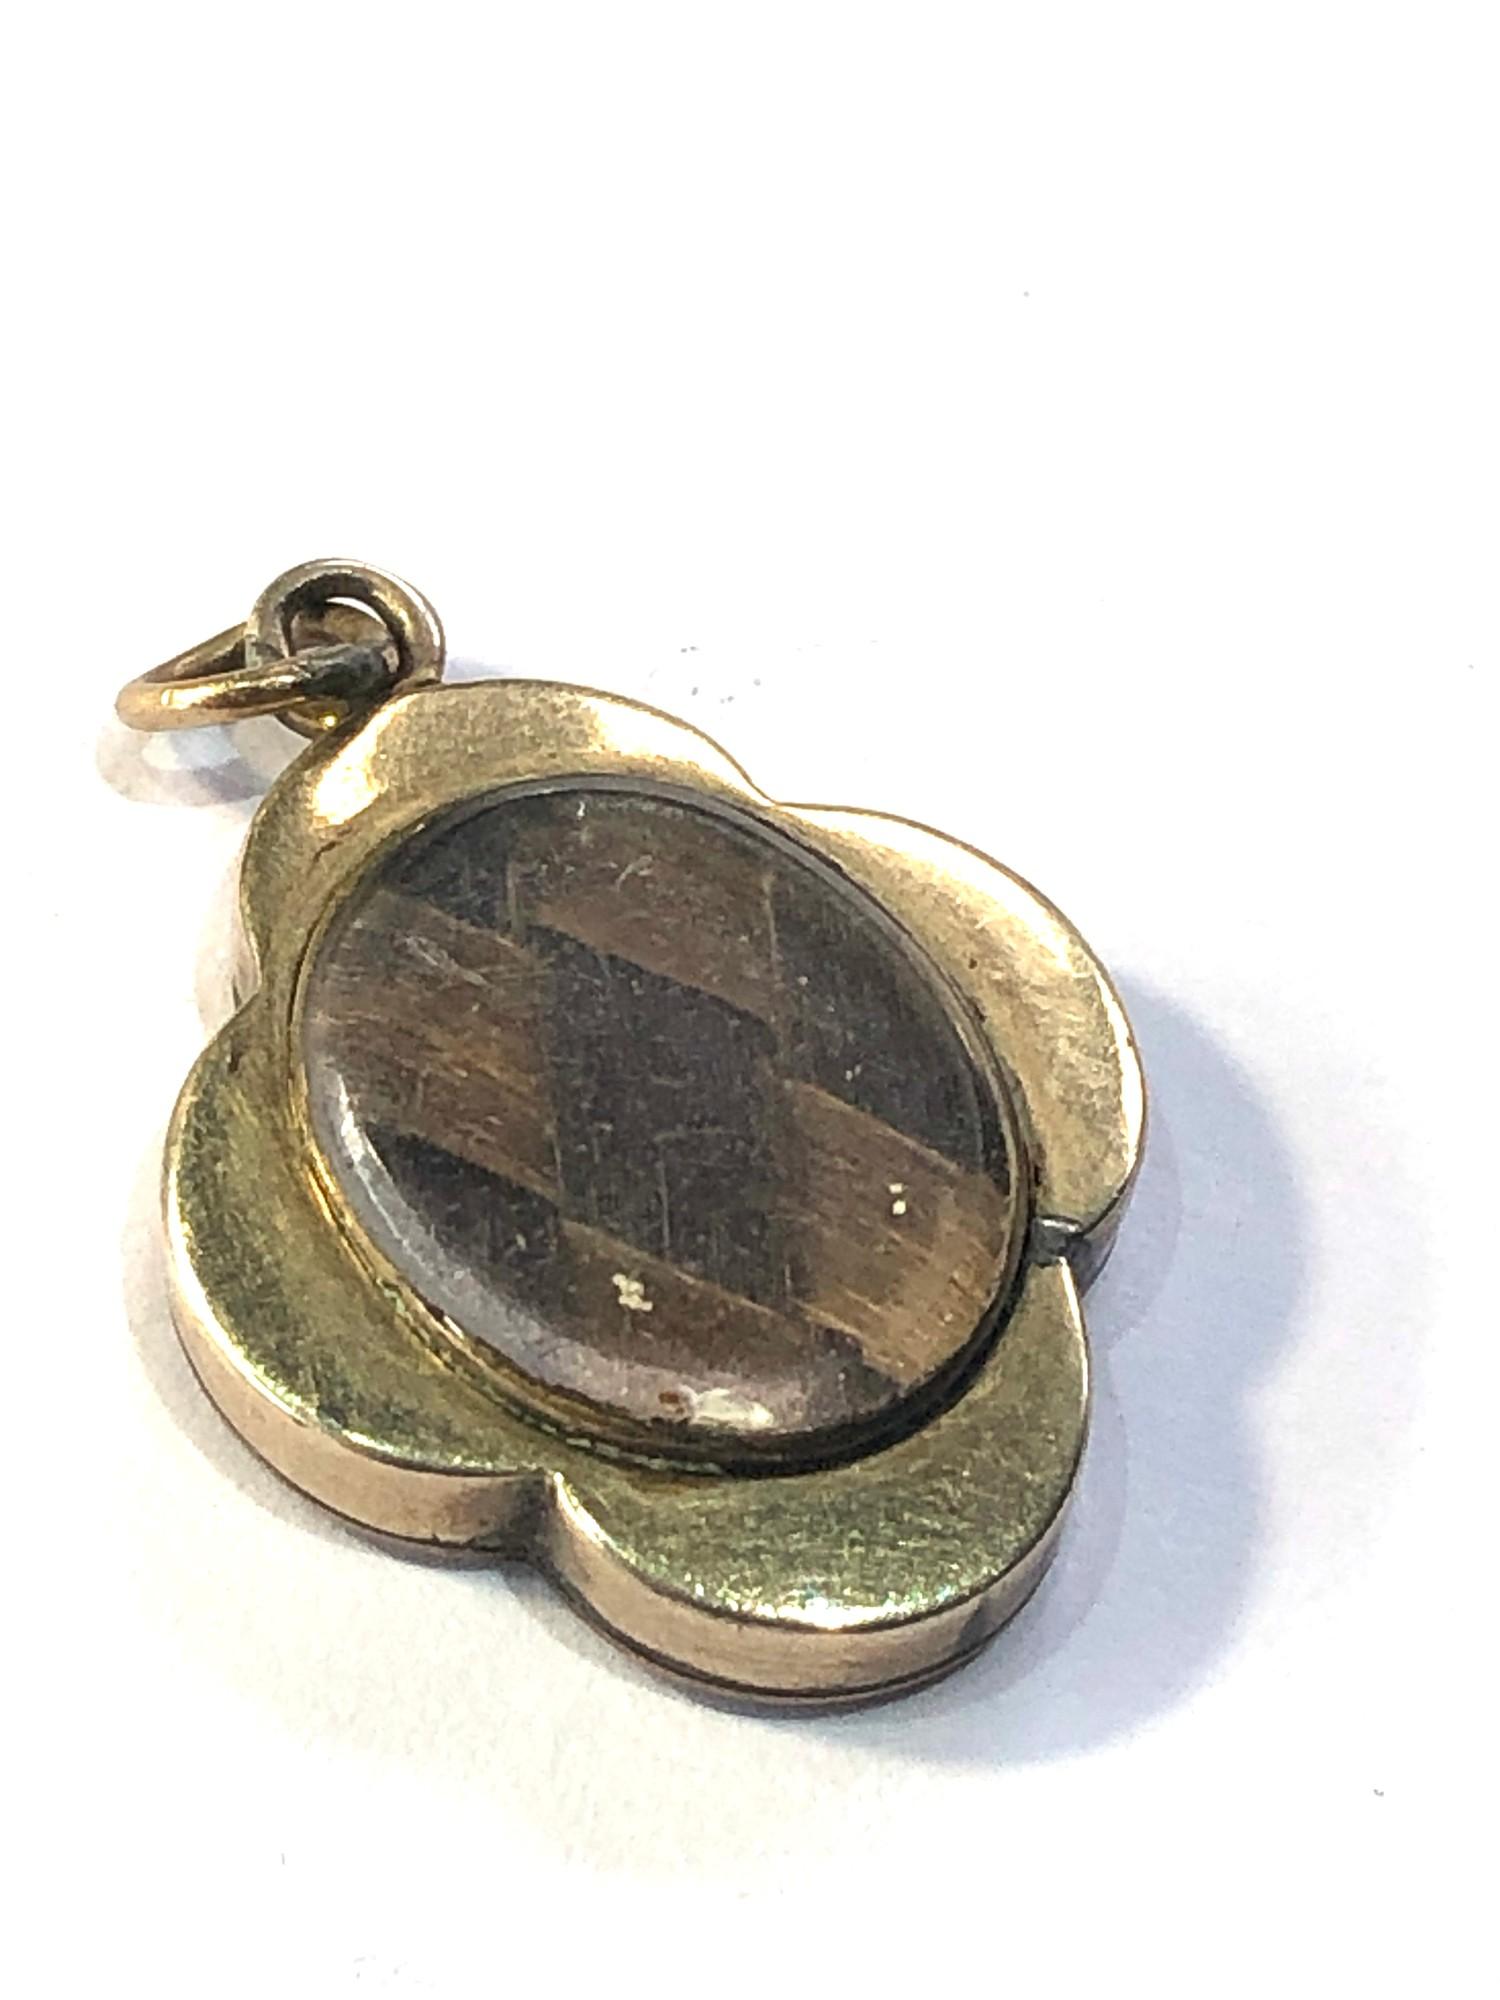 Antique gold enamel mourning hair locket pendant measures approx 2.3cm drop by 17mm wide - Image 3 of 3